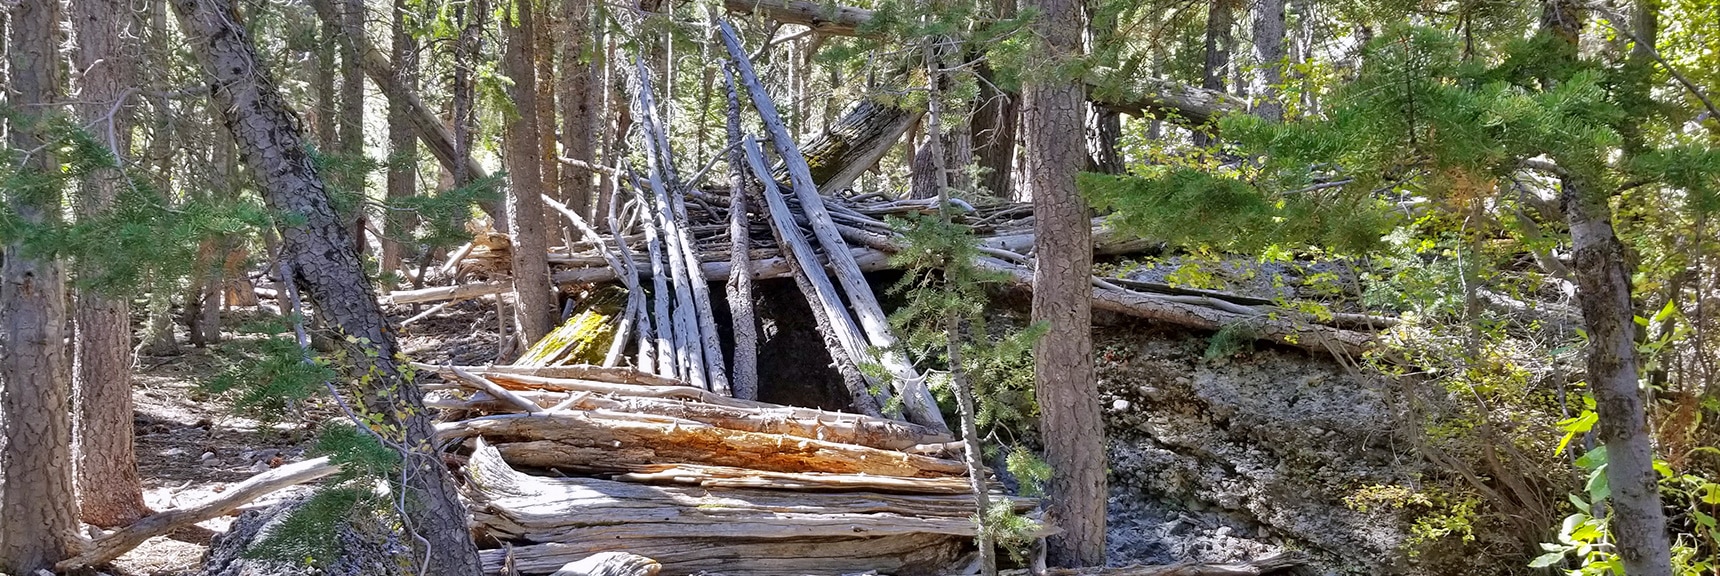 Makeshift Shelter In Lower Cougar Ridge Trail Forest | Mummy Springs Loop | Mt. Charleston Wilderness | Spring Mountains, Nevada